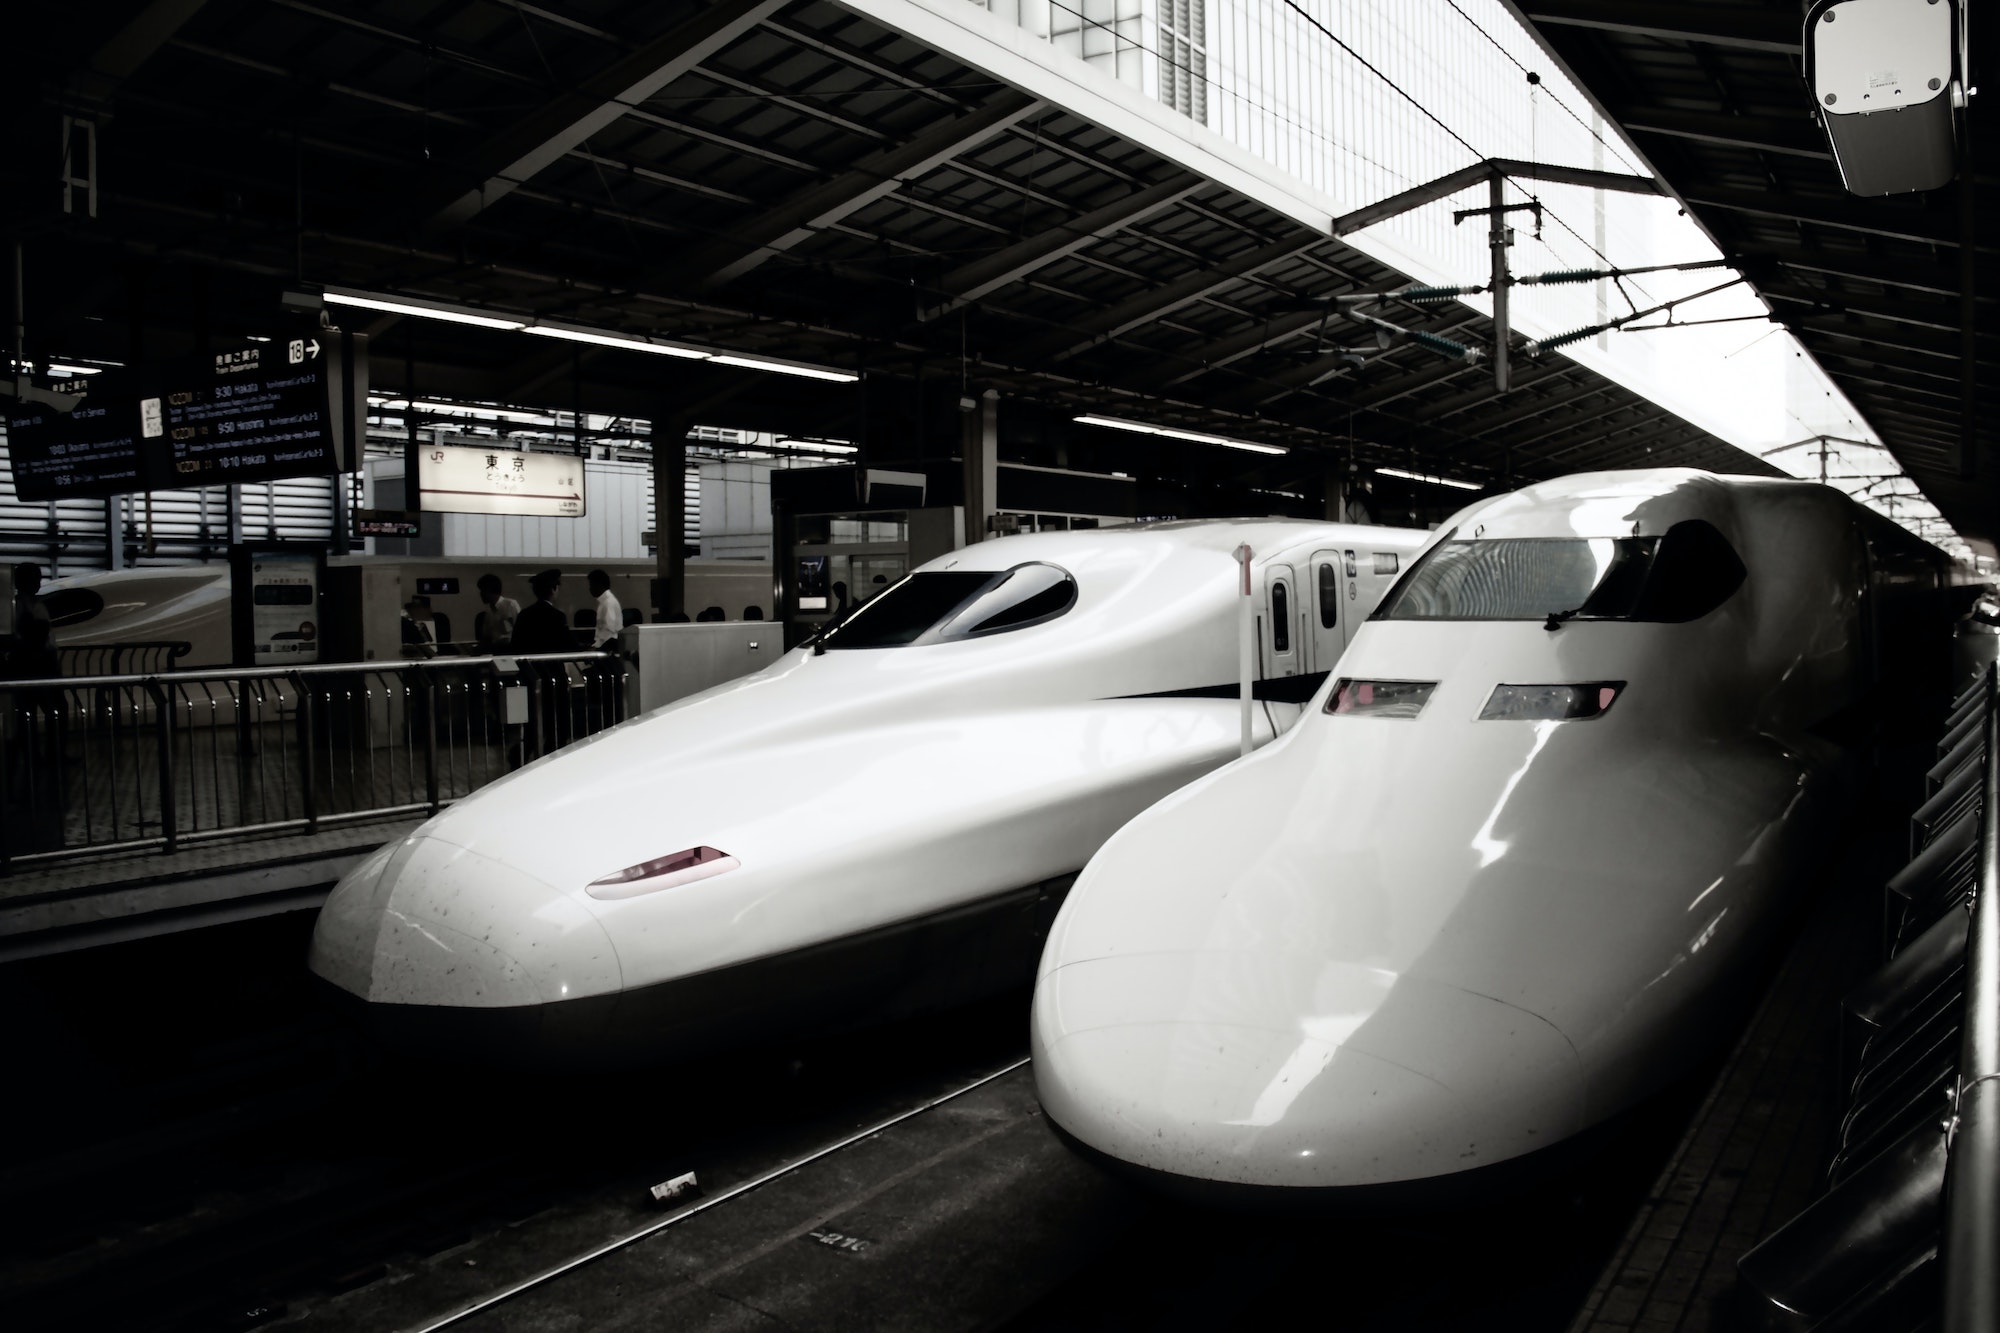 Do I need to reserve a space for my suitcase when riding the Shinkansen?